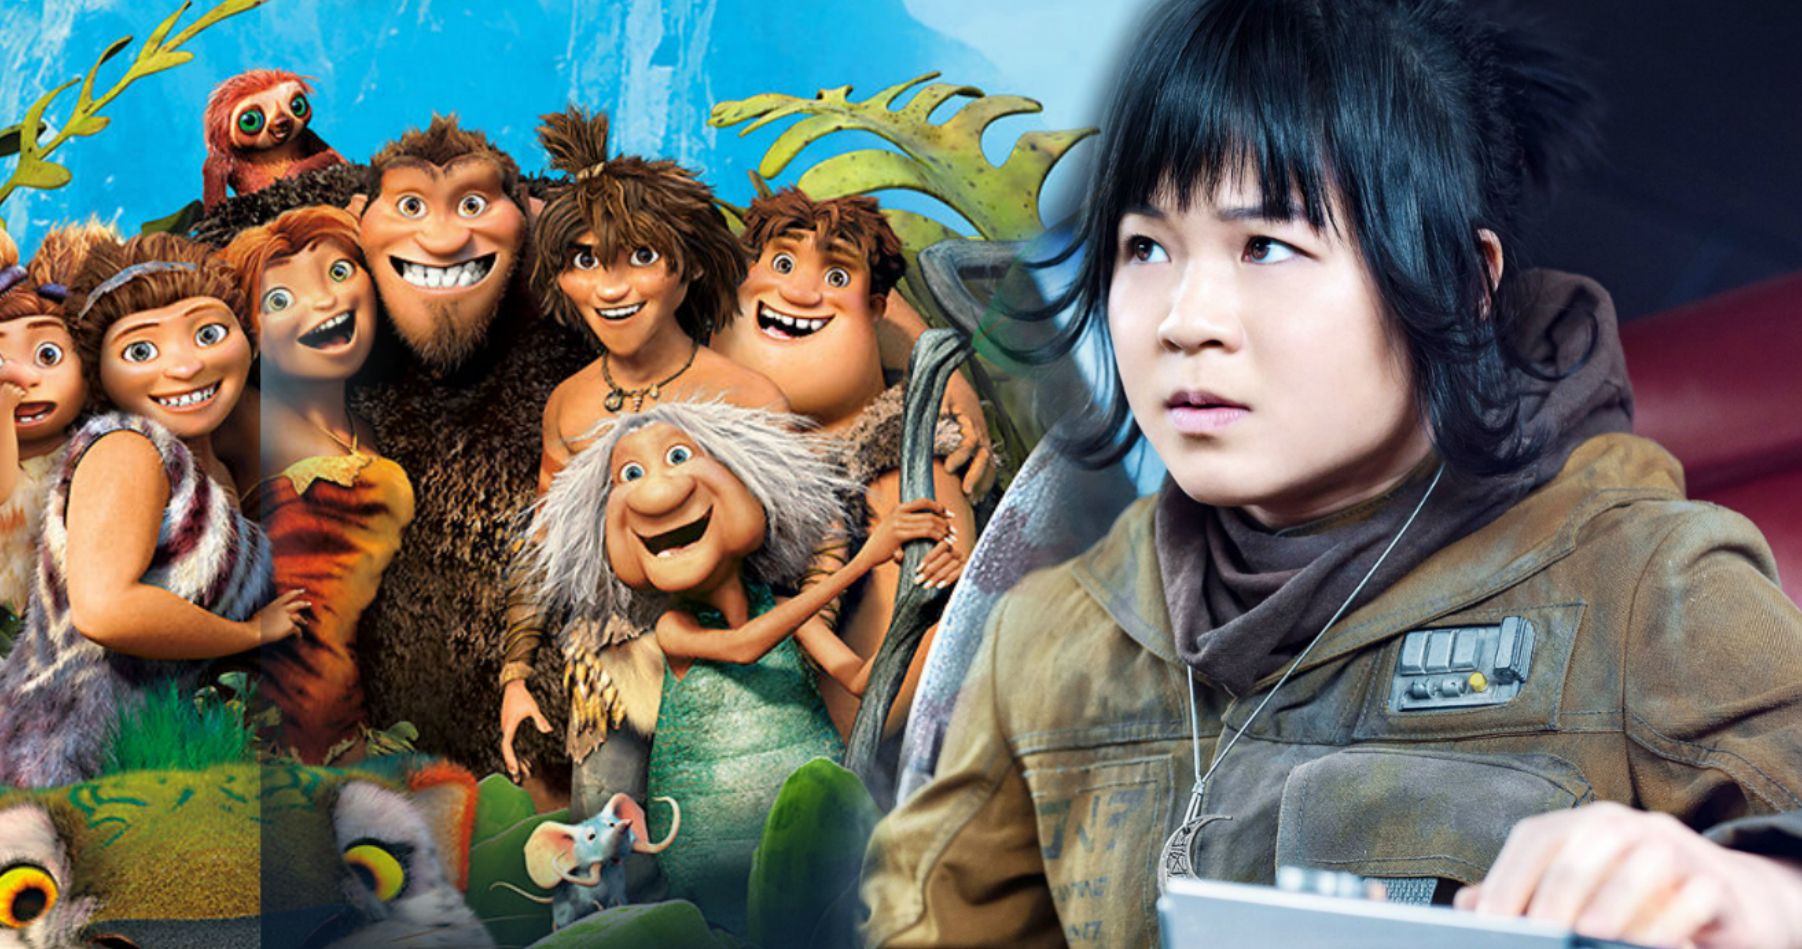 The Croods 2 Recruits Star Wars Rose Tico Actress Kelly Marie Tran